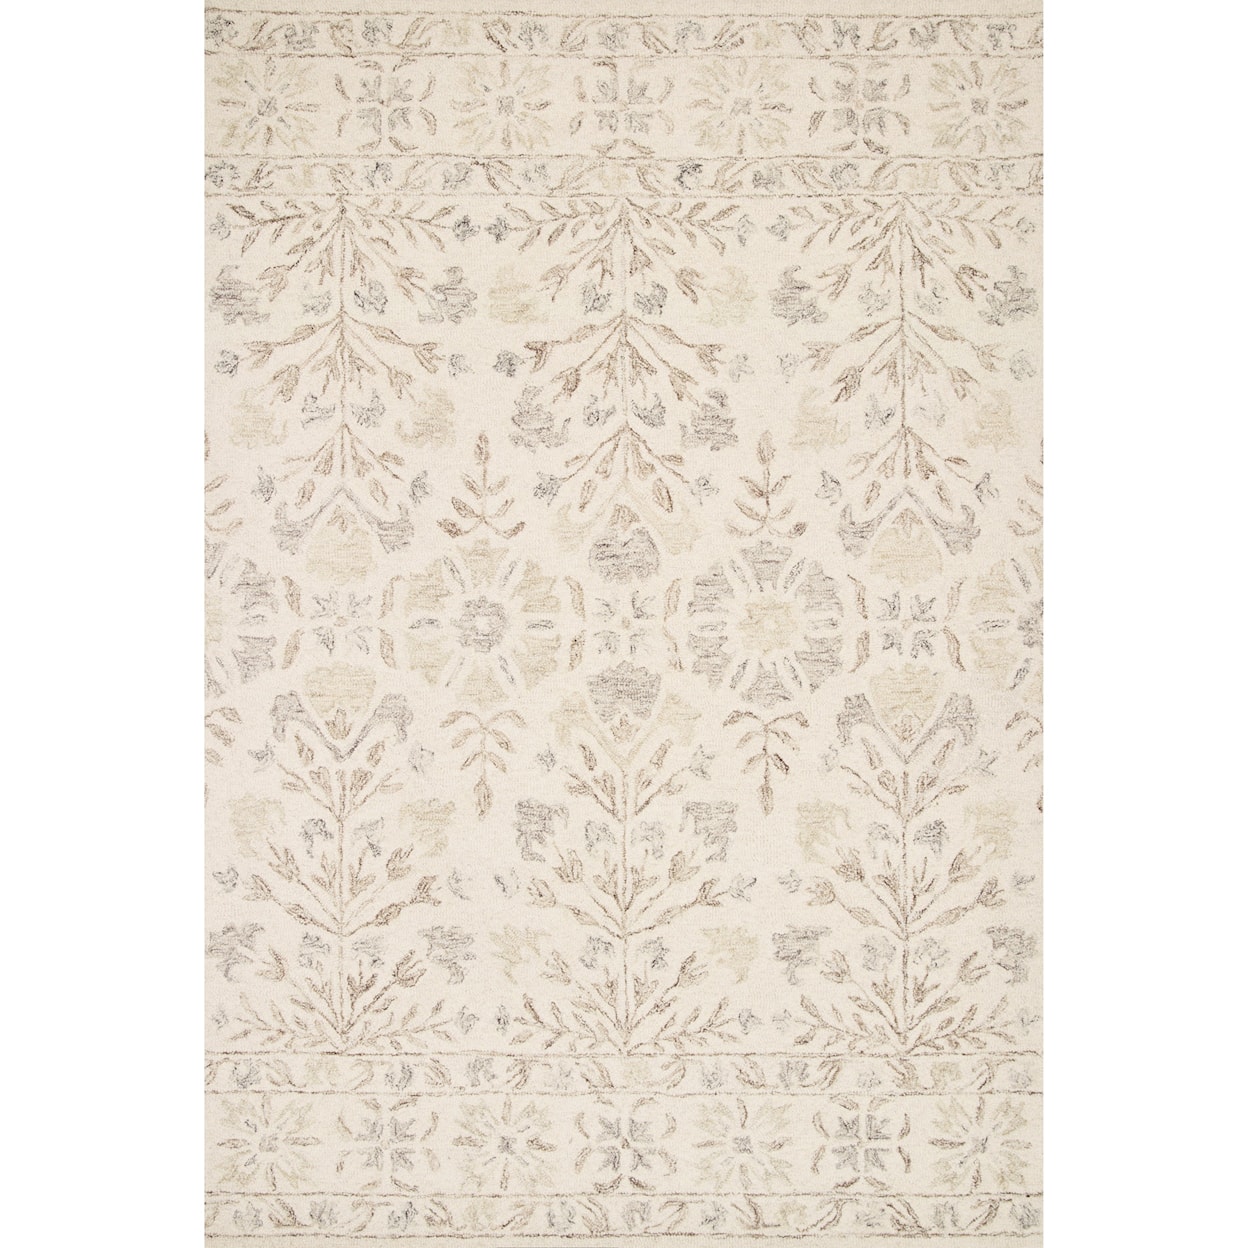 Loloi Rugs Norabel 3'6" x 5'6" Ivory / Neutral Rug